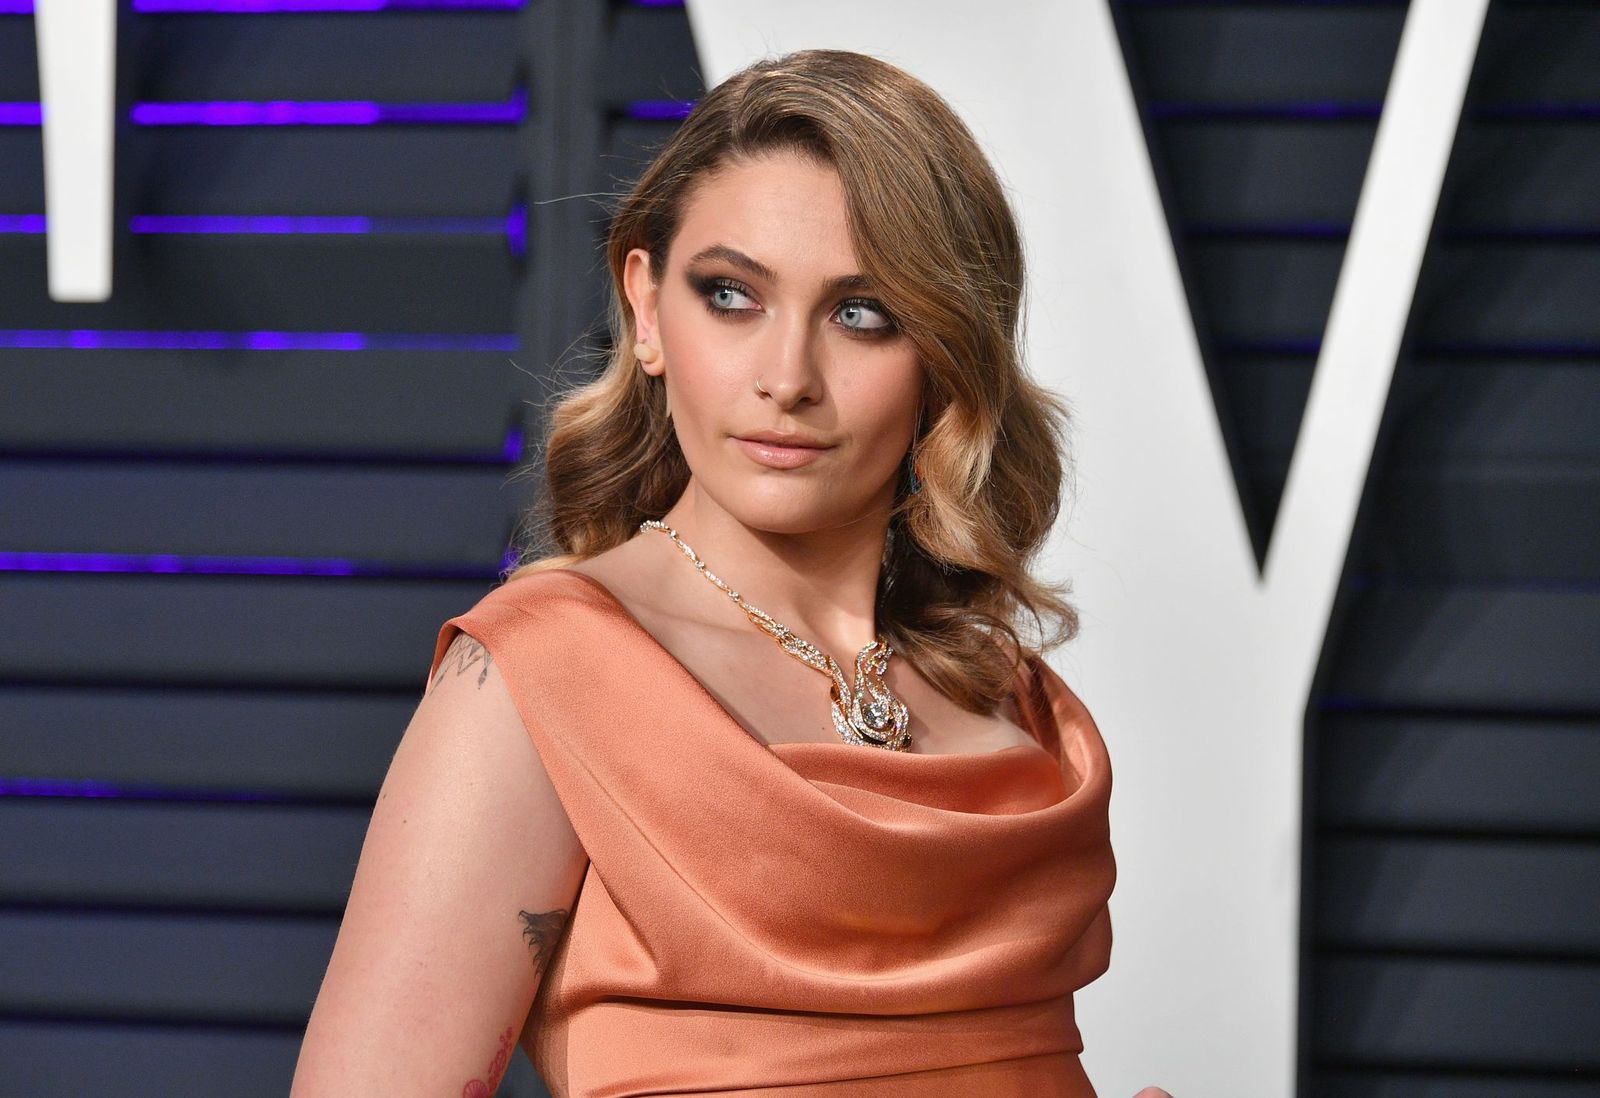 Paris Jackson at the 2019 Vanity Fair Oscar Party hosted by Radhika Jones at Wallis Annenberg Center on February 24, 2019 | Photo: Getty Images